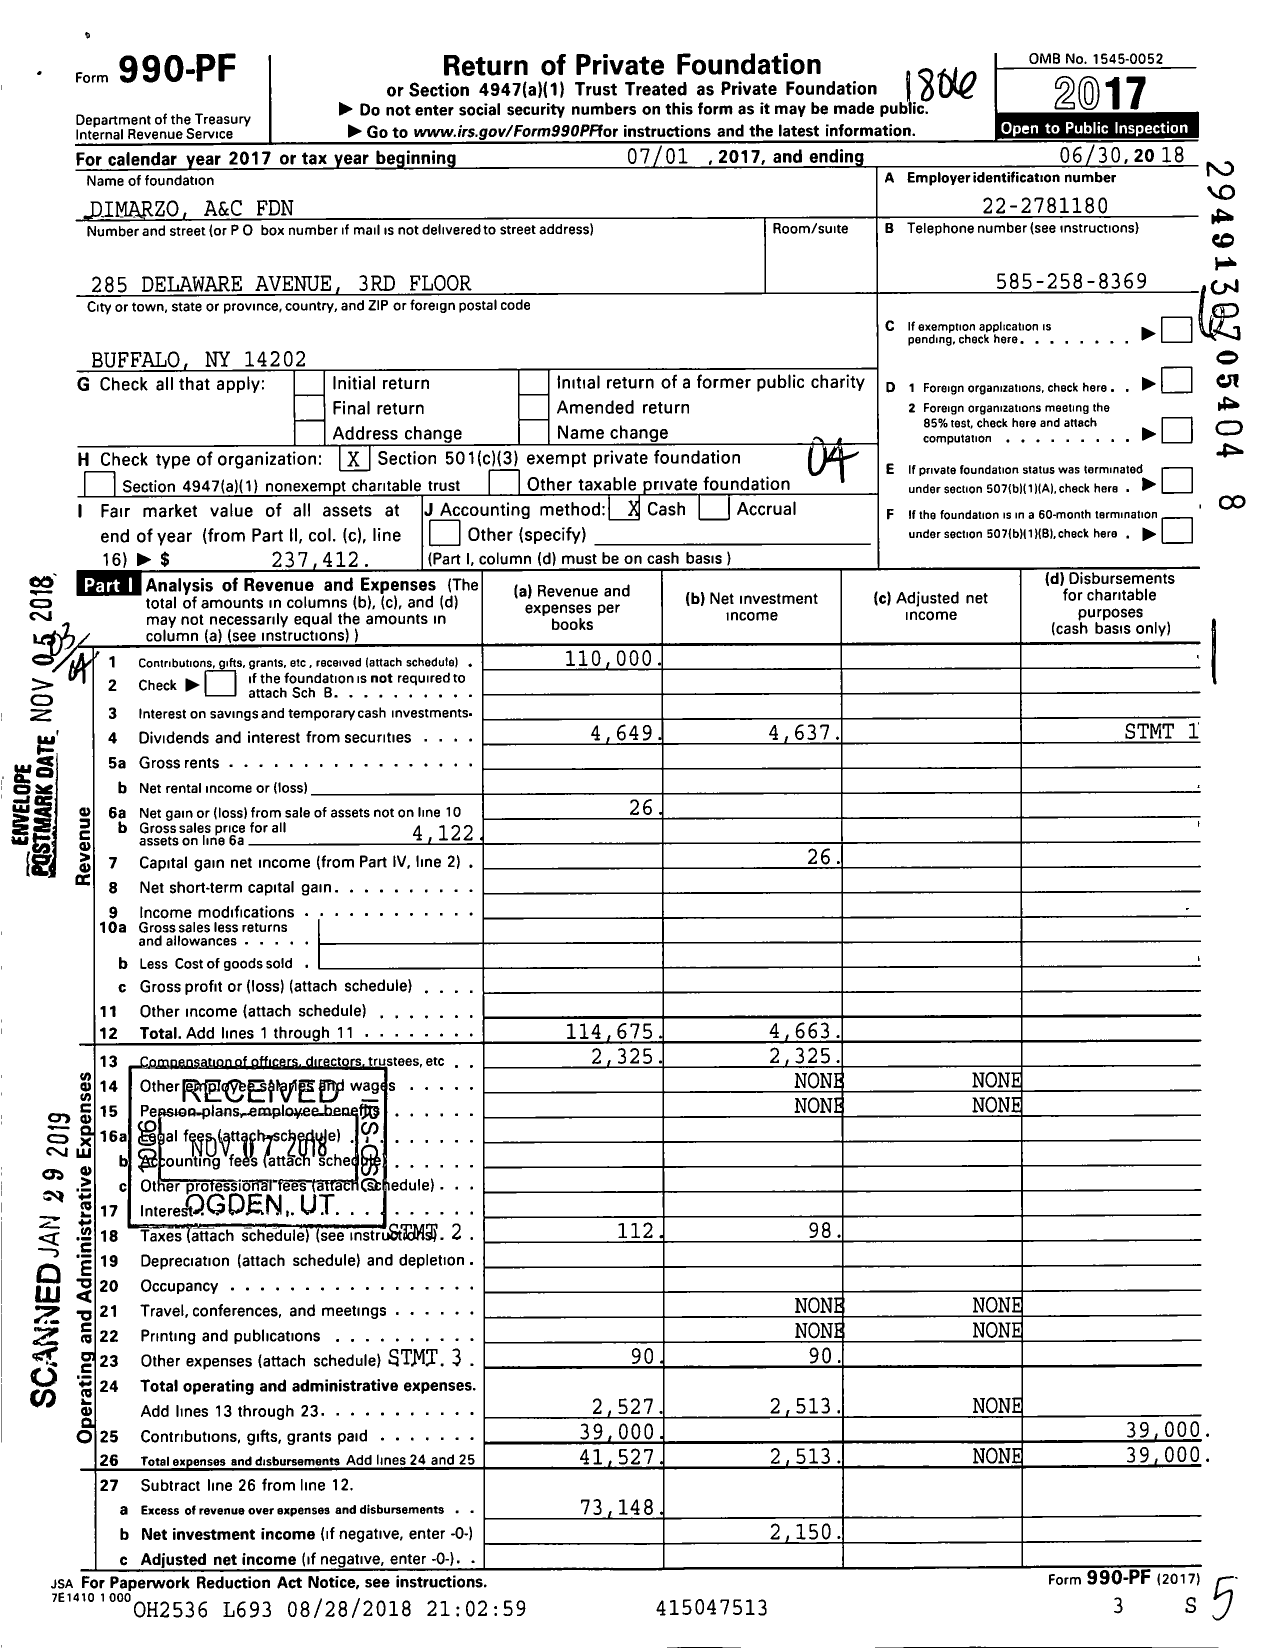 Image of first page of 2017 Form 990PF for Dimarzo A&c Foundation